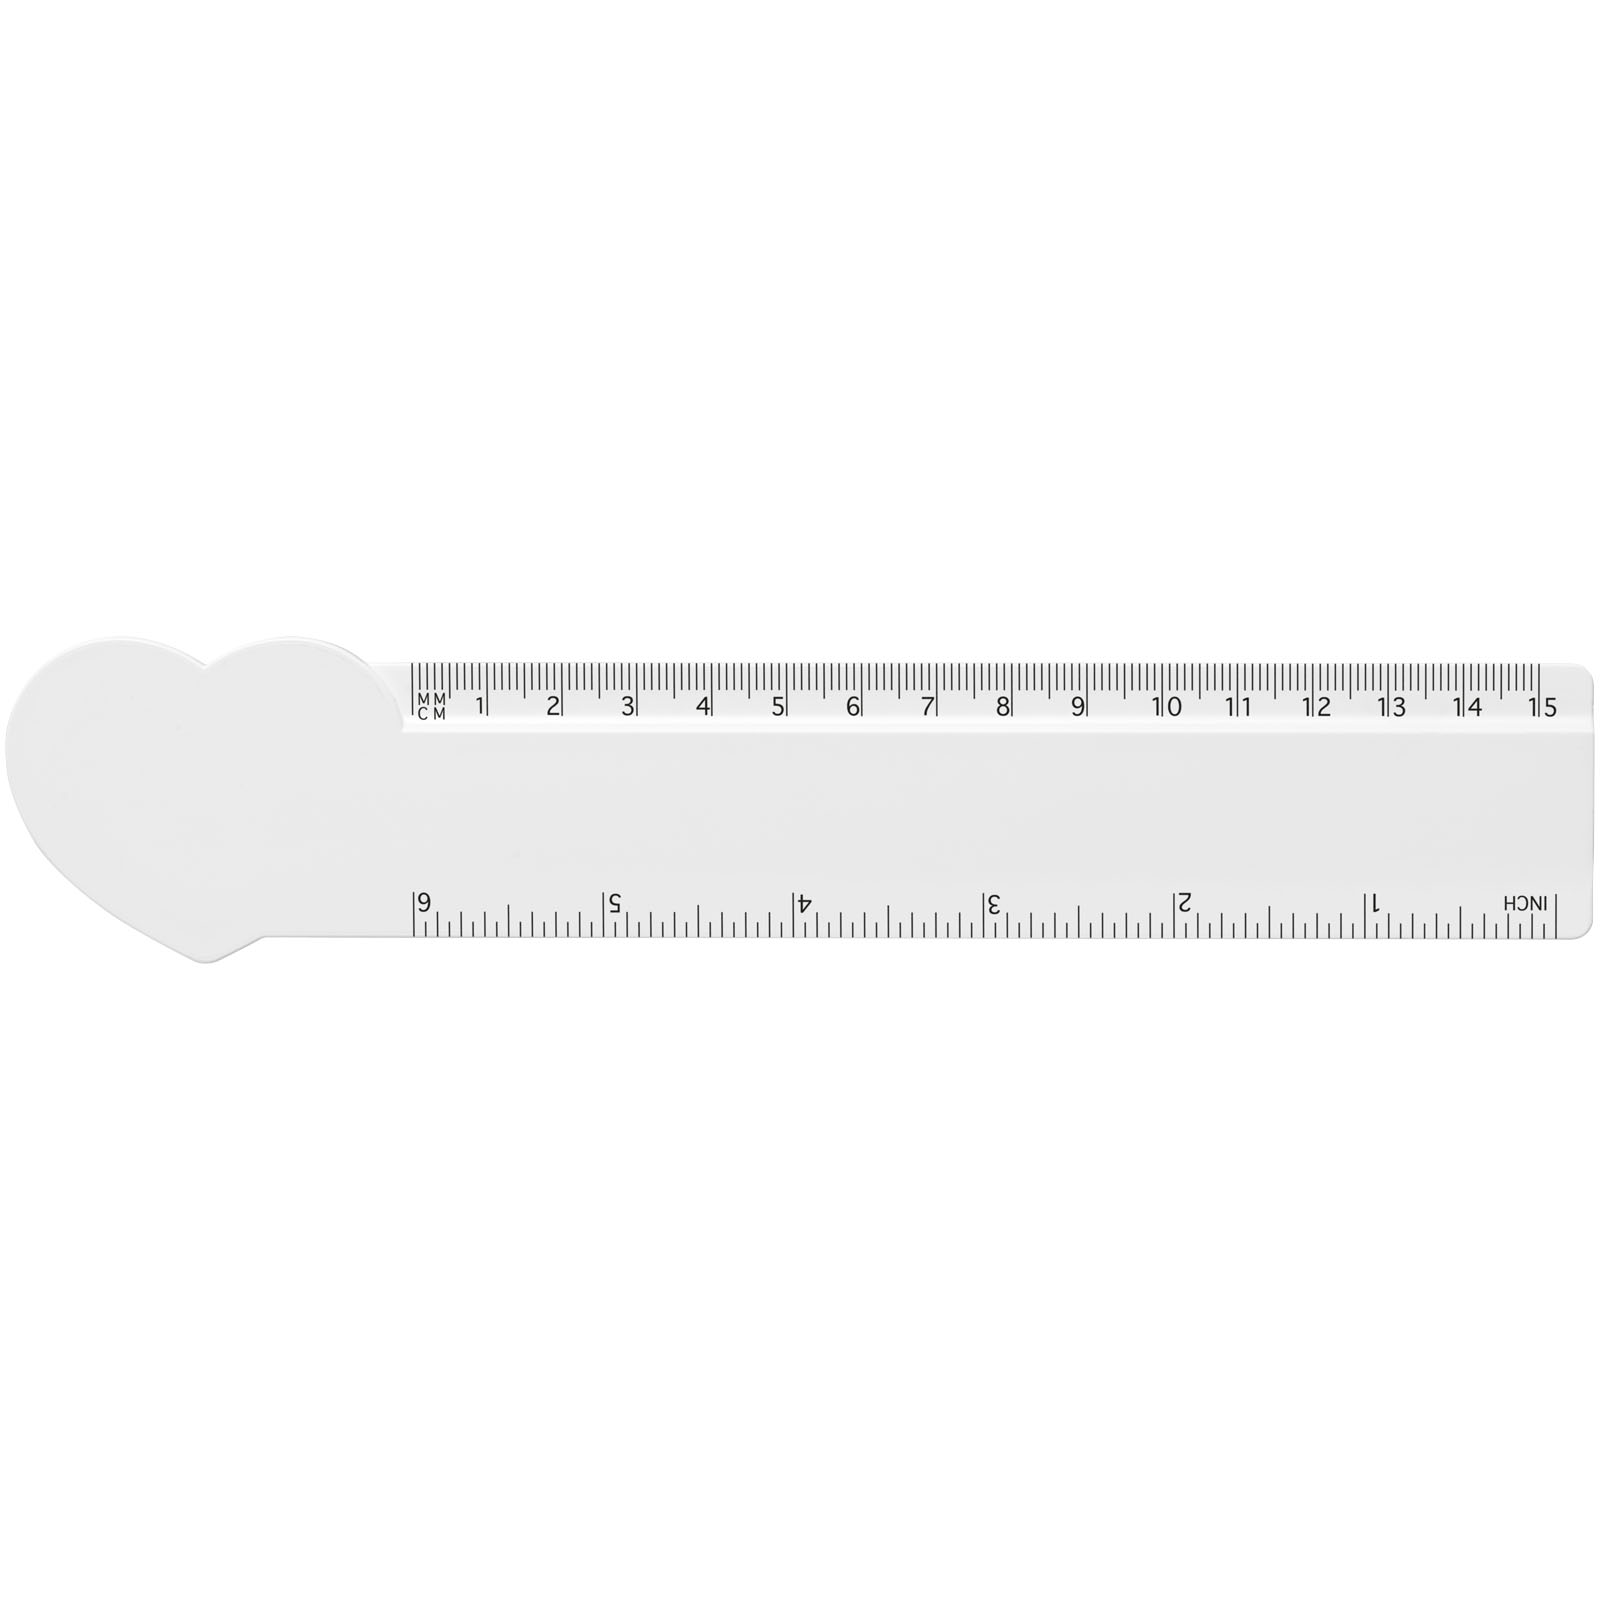 Advertising Desk Accessories - Tait 15 cm heart-shaped recycled plastic ruler - 1